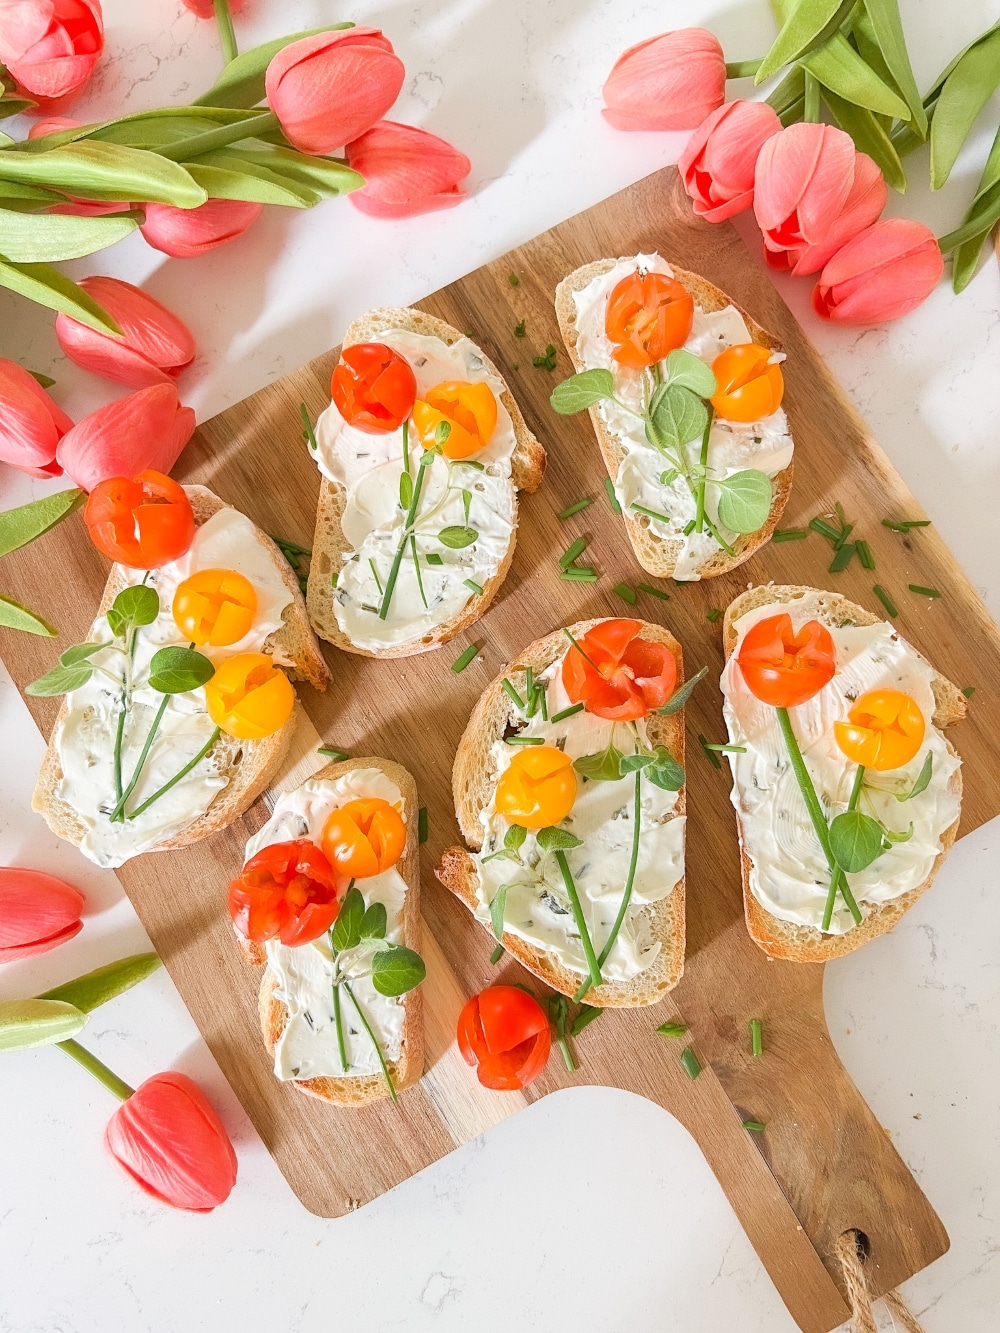 Spring Brunch Tulip Toast. Tulip toast will look beautiful on your Spring brunch table and it's so easy to make! 